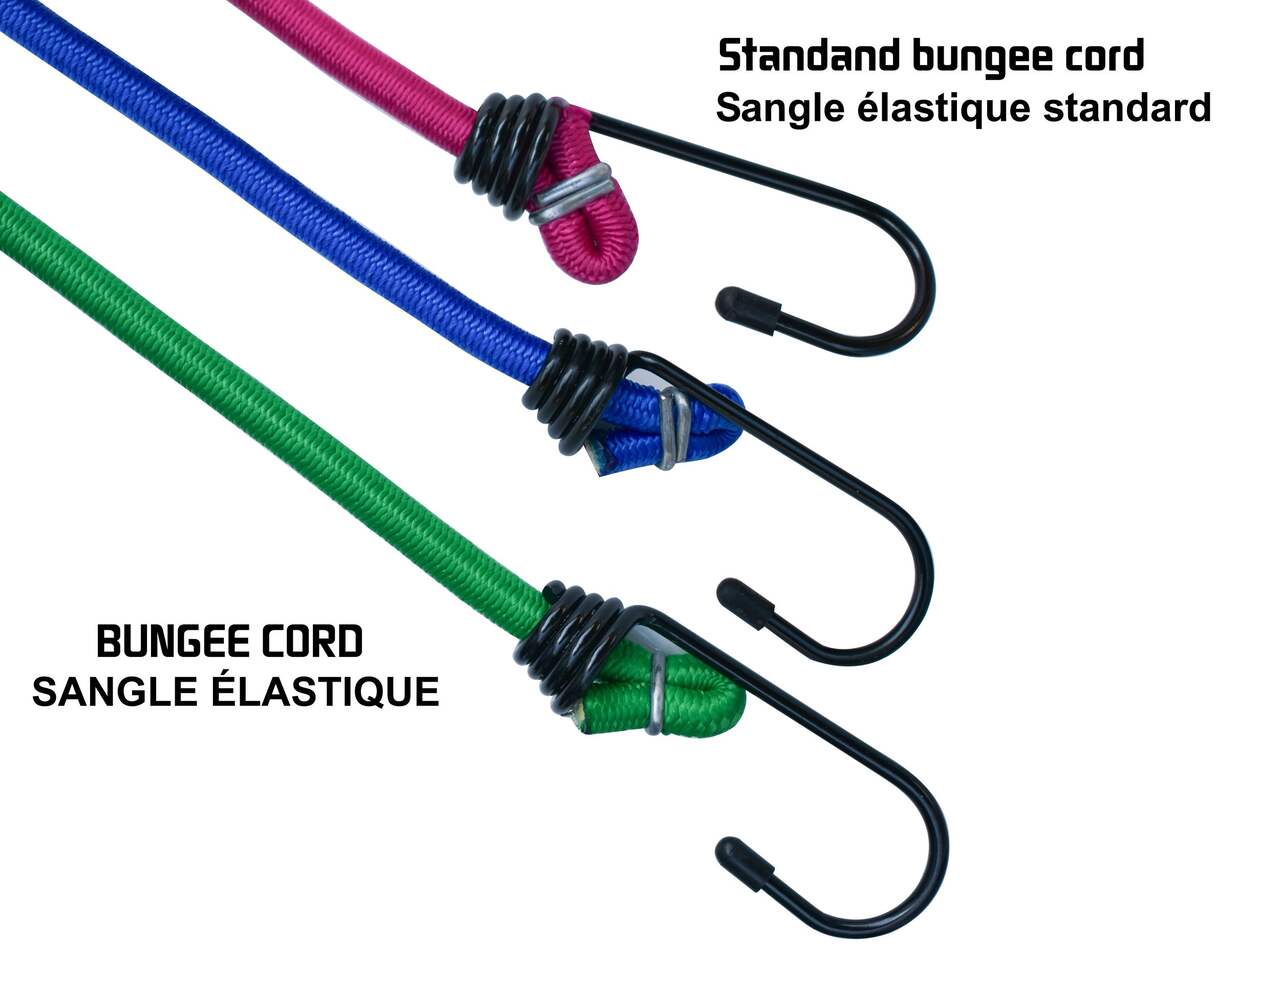 Certified Standard Bungee Cord Kit, Assorted Sizes, 6-pk